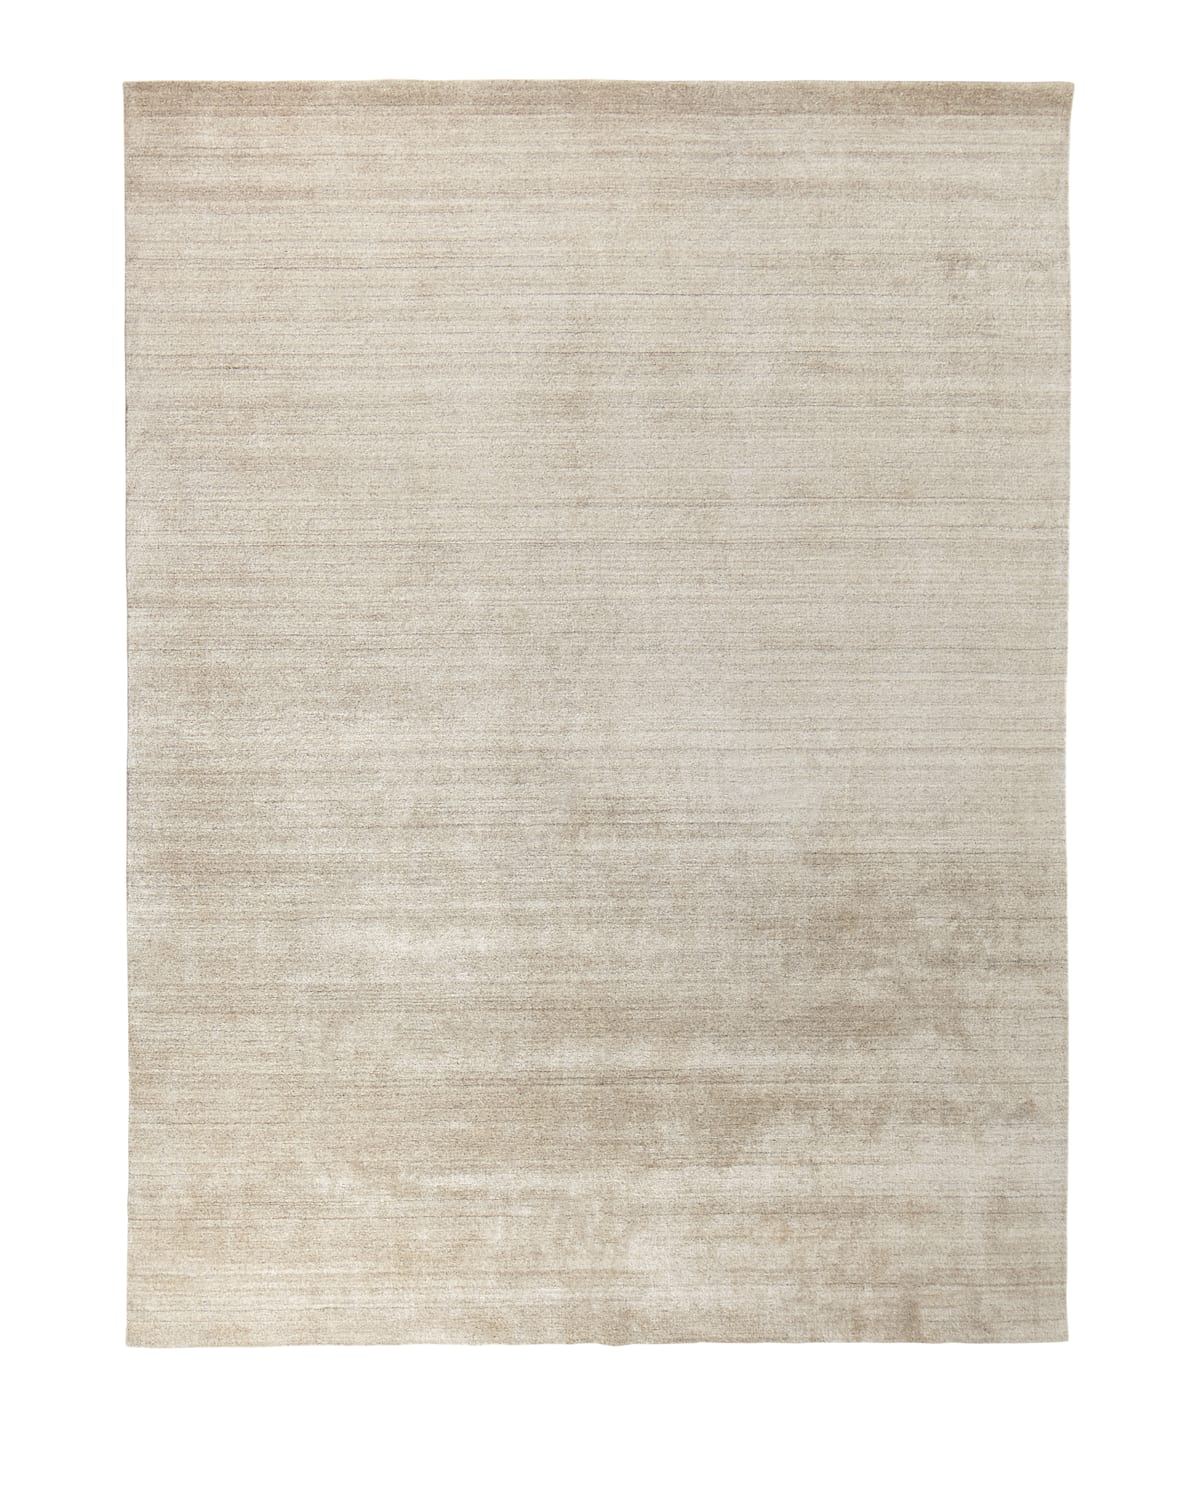 Exquisite Rugs Thames Rug, 12' X 15' In Neutral